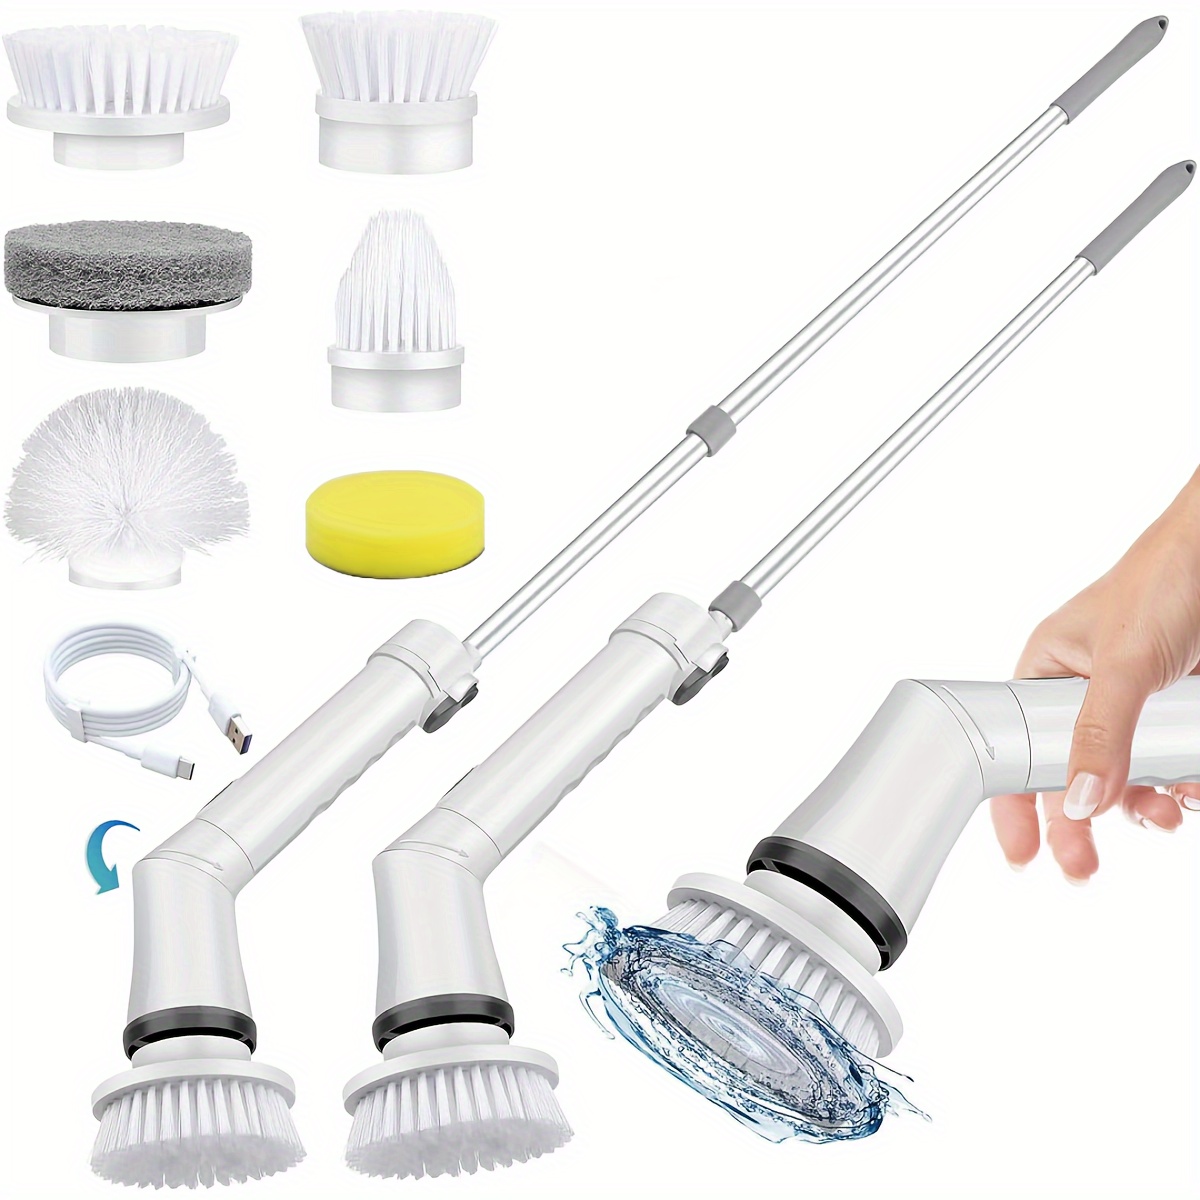 

1set, Electric Spin Scrubber - Bathroom Scrubber With 6 Replaceable Heads, Shower Scrubber Cleaning Brush Adjustable Handle For Bathroom Tub Kitchen Home Floor, Cleaning Supplies, Cleaning Tool